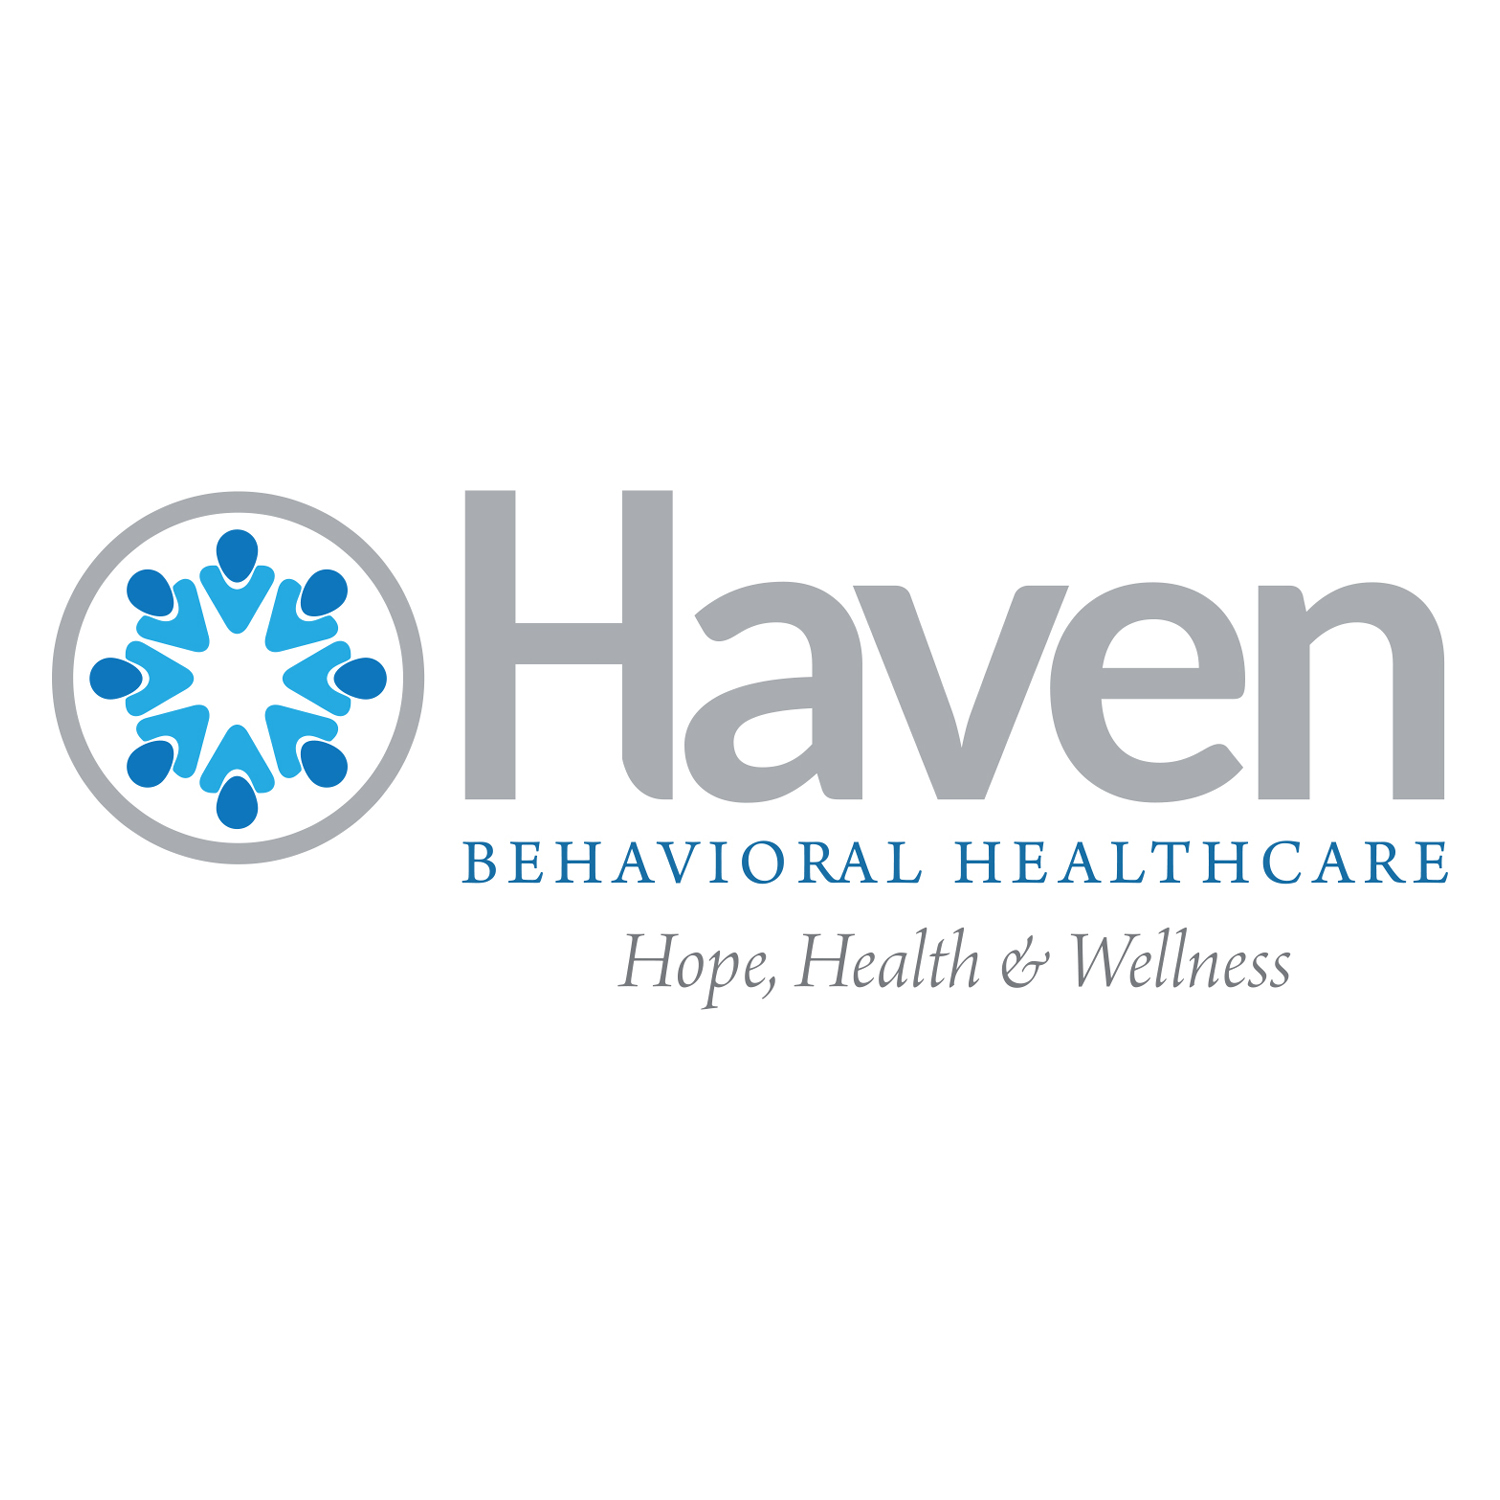 Haven Behavioral Healthcare logo written in grey and blue with a blue and grey circle  snowflake icon to the left